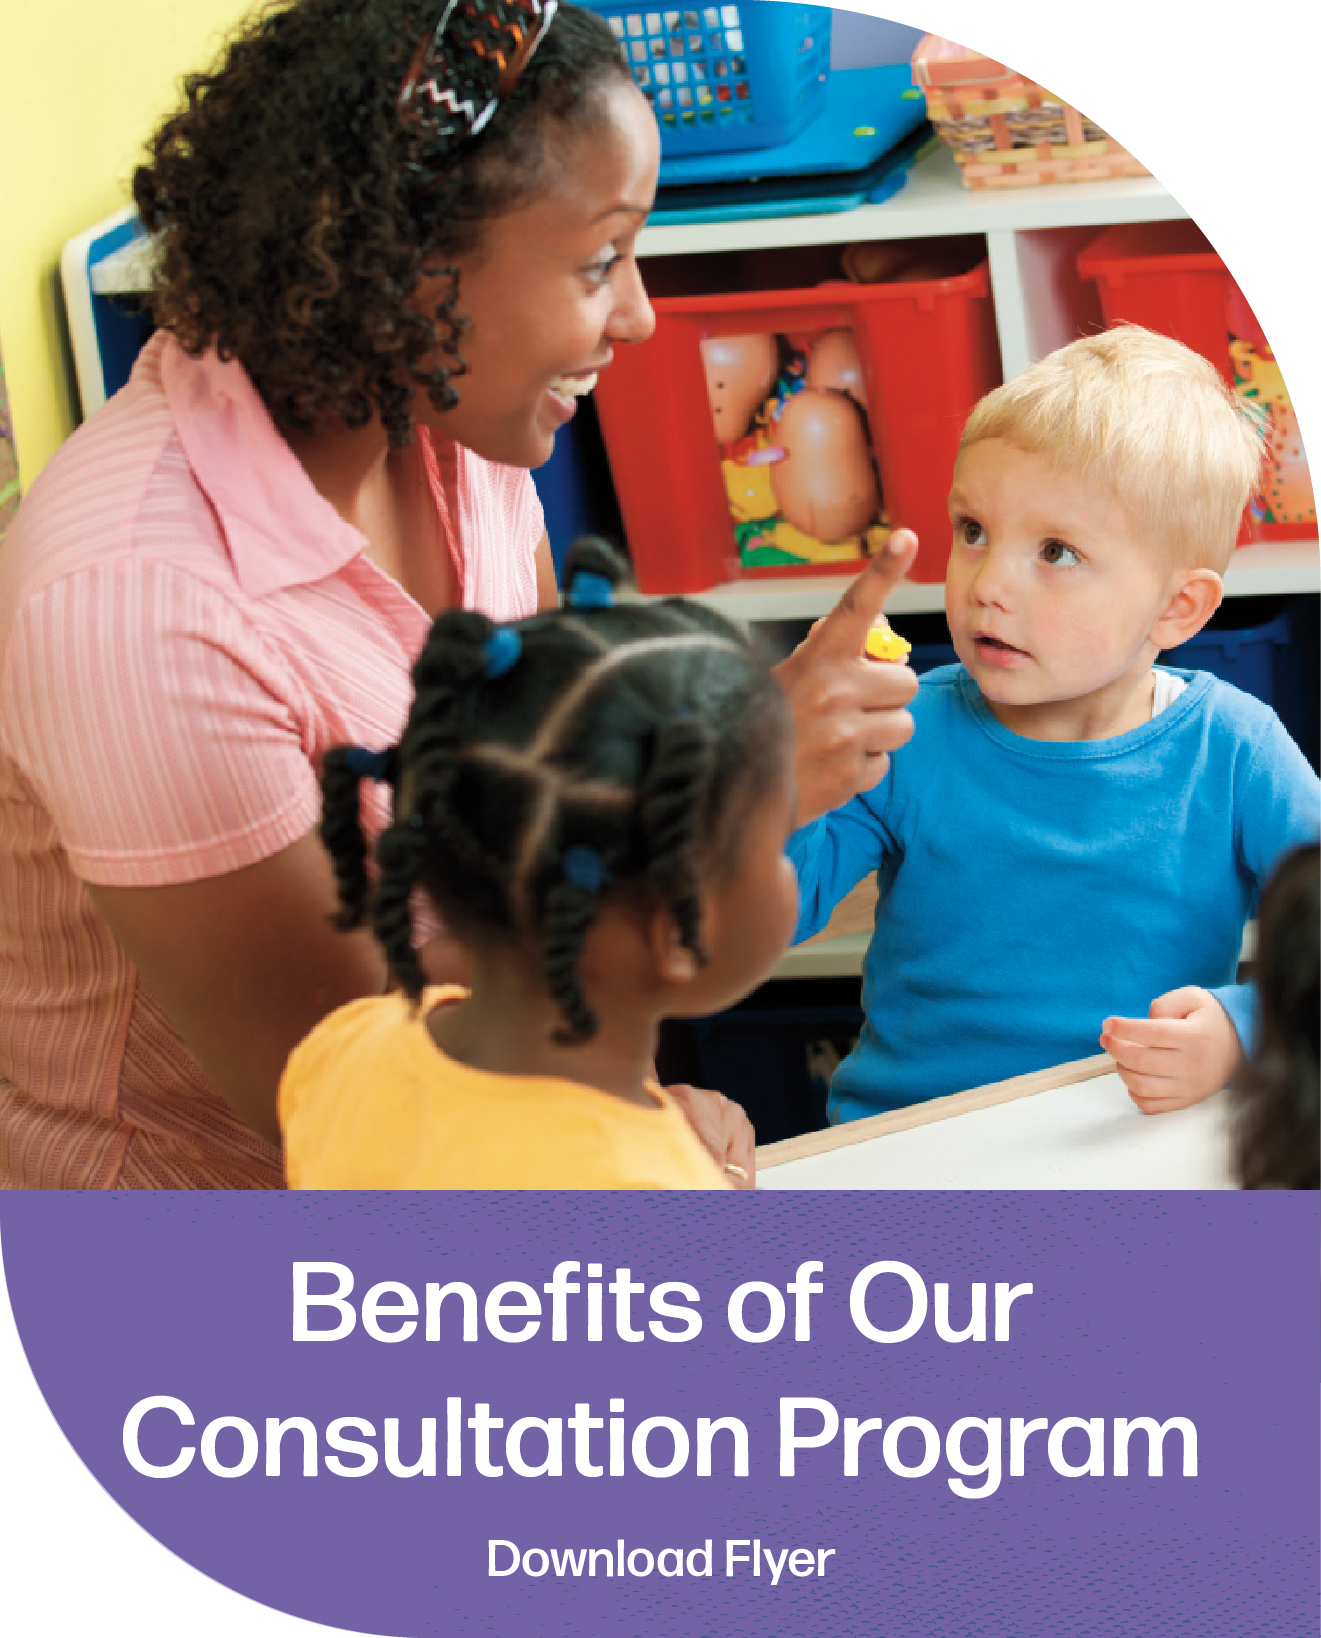 Benefits of Our Consultation Program Flyer